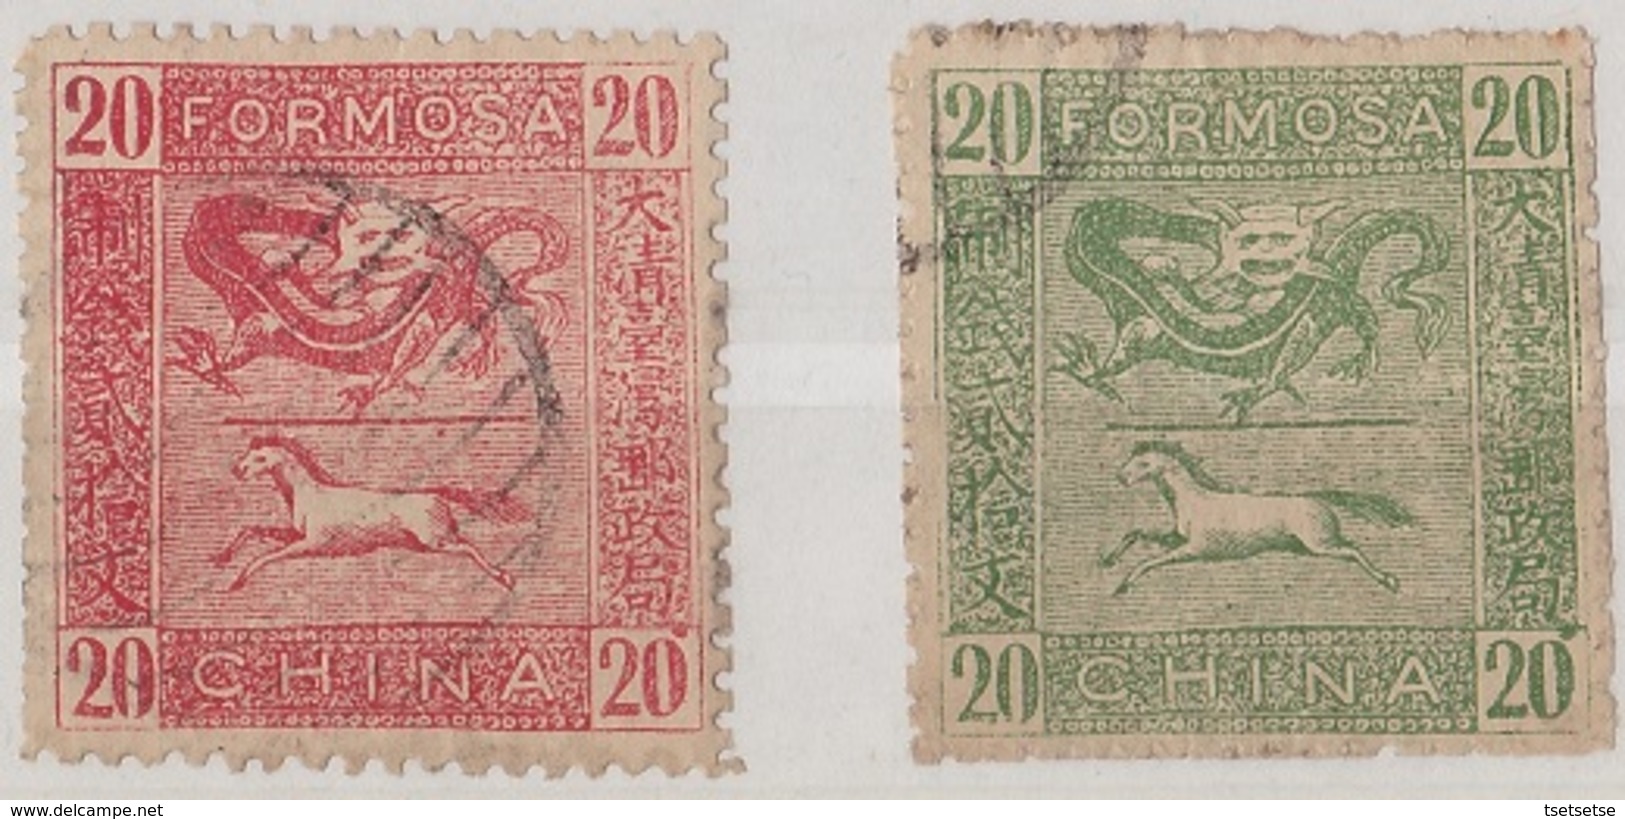 STAMPS - CHINA / FORMOSA 1888 HORSE AND DRAGON STAMPS, SG #C5-6 SET - Used Stamps